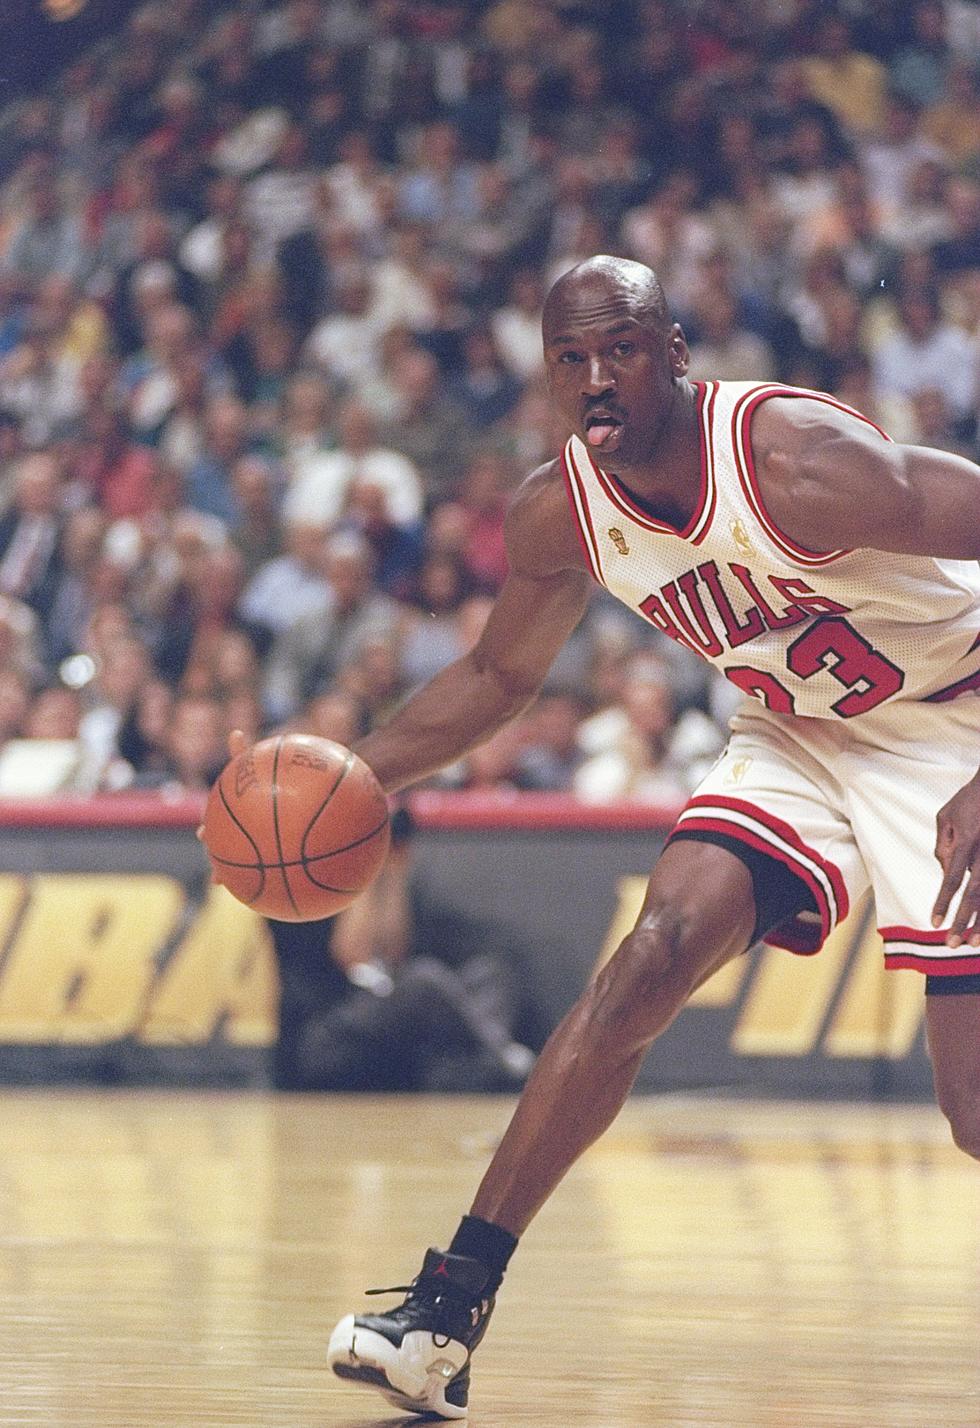 Find Out How You Can Bid On Michael Jordan’s Home OF 19 Years In Chicago [VIDEO]